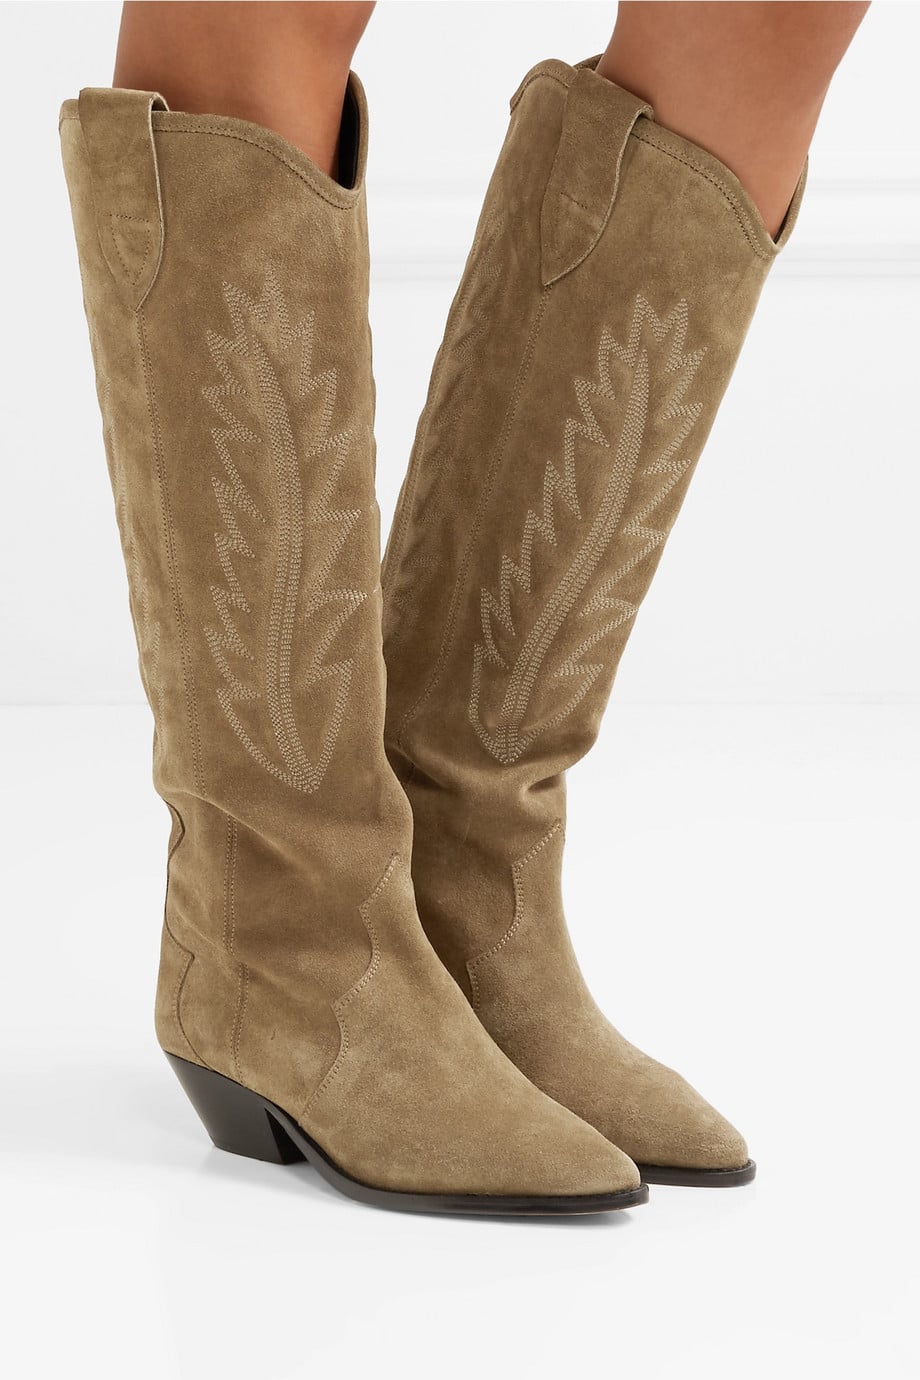 Isabel Marant Denzy Embroidered Suede Knee Boots | The 1 Boot You Need For 2018, in a Nutshell | Fashion Photo 26